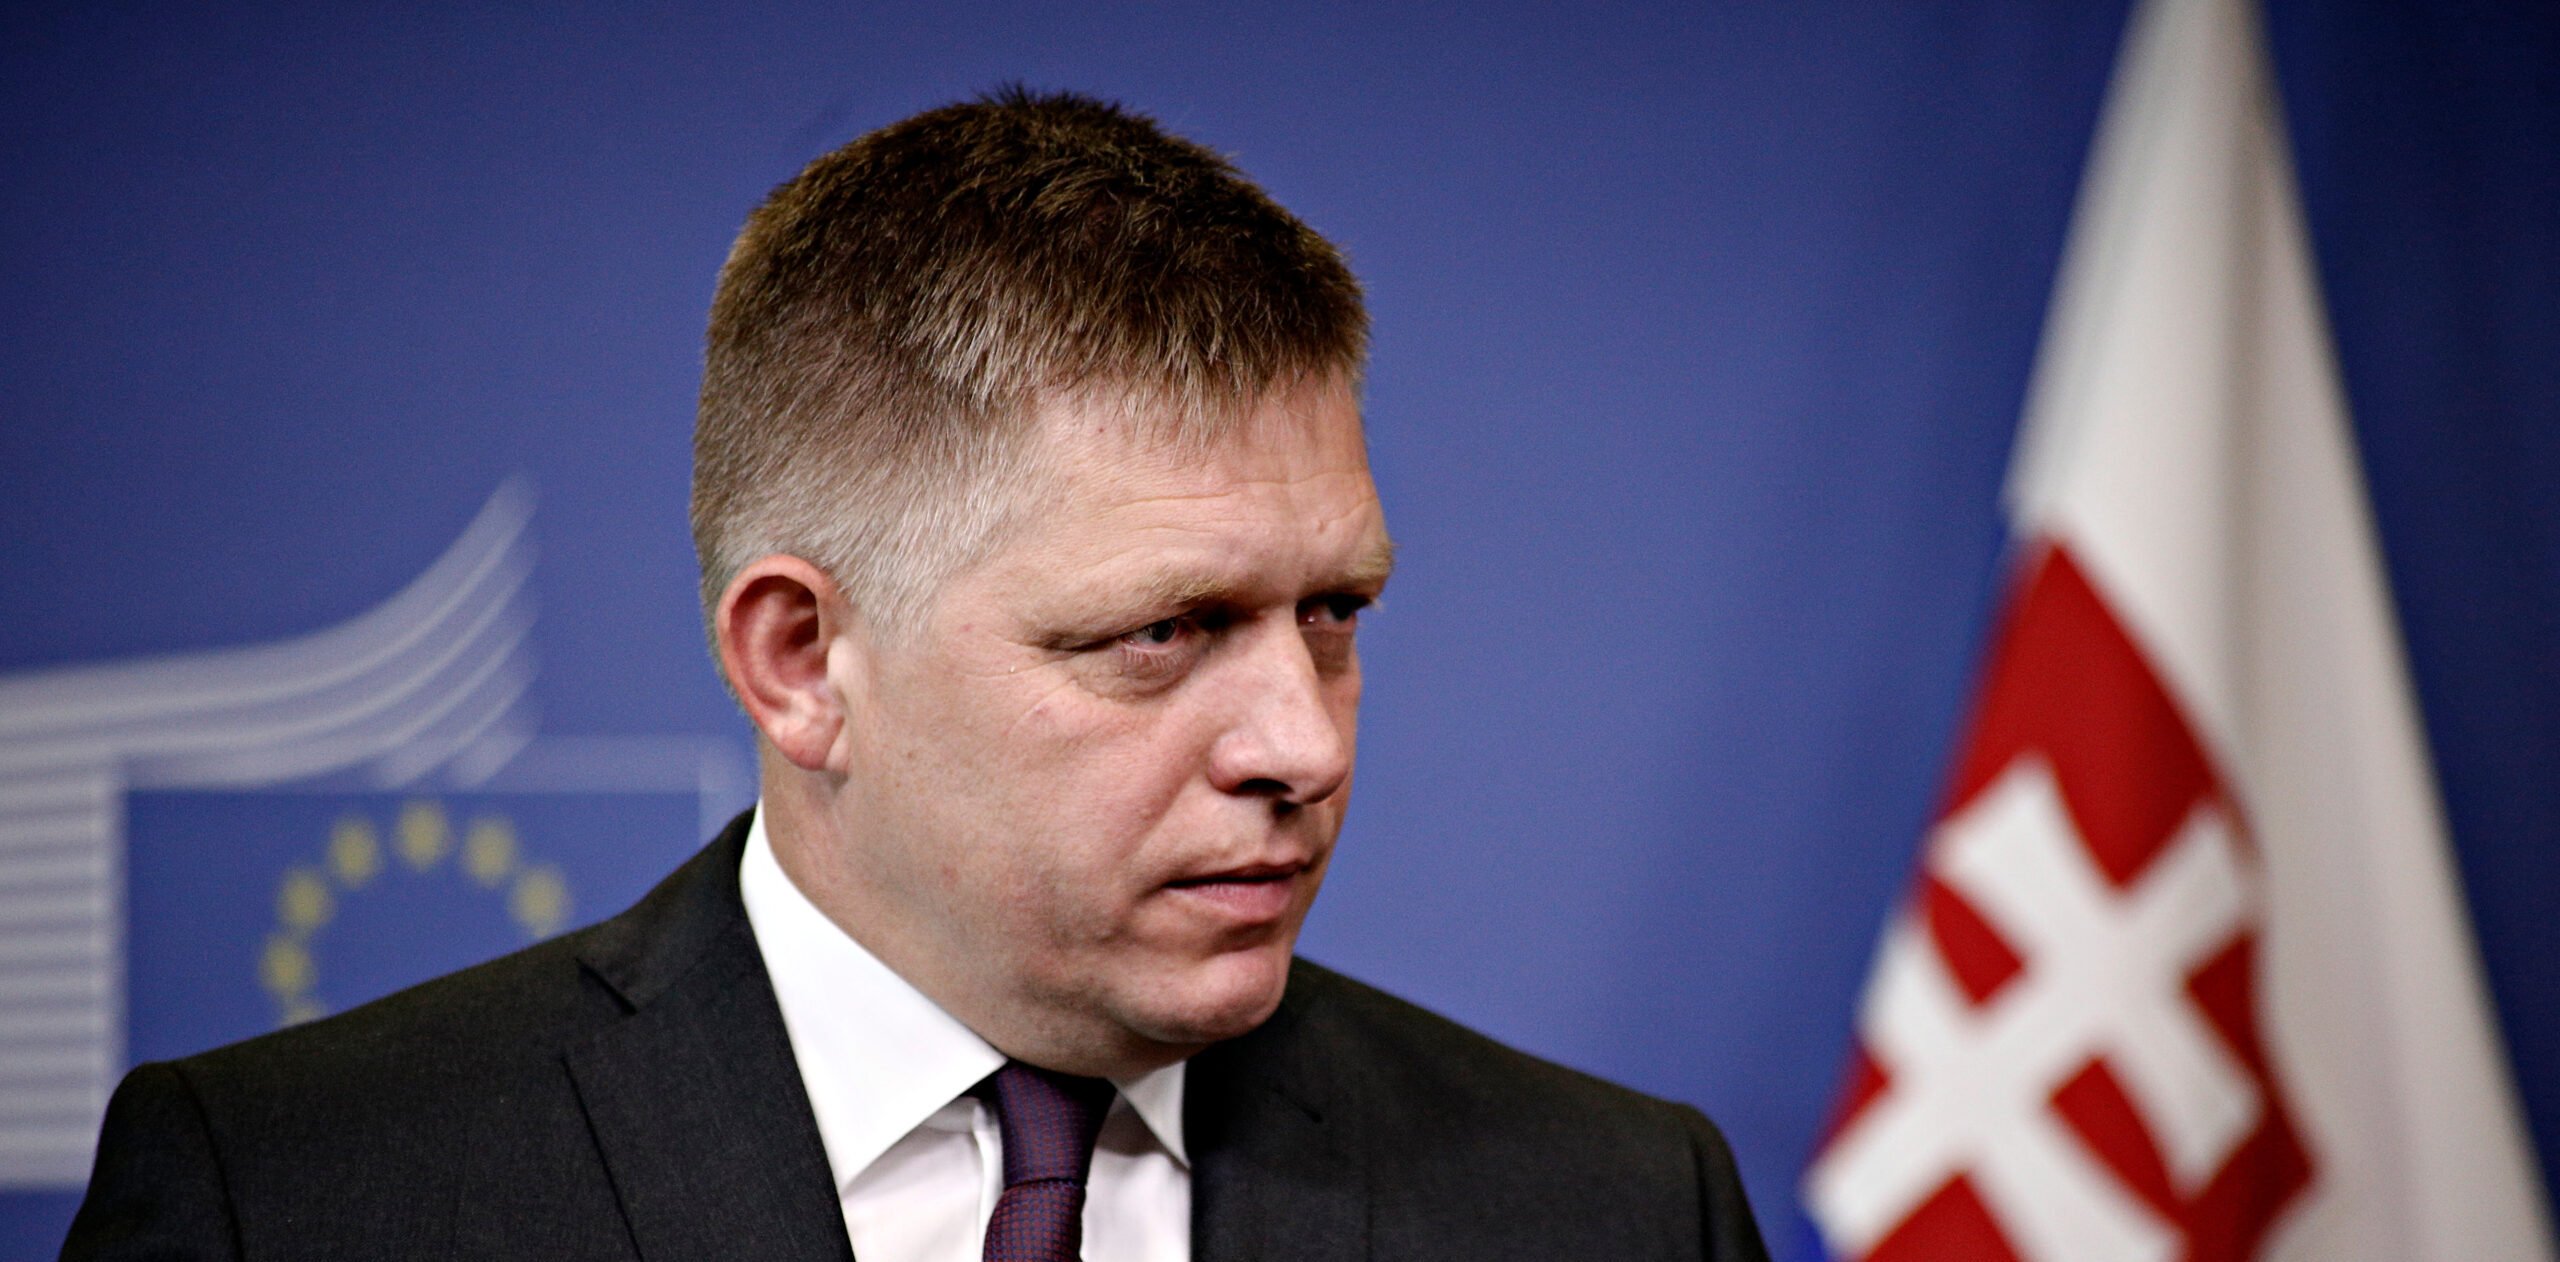 Slovak PM sparks controversy with statements on Ukraine